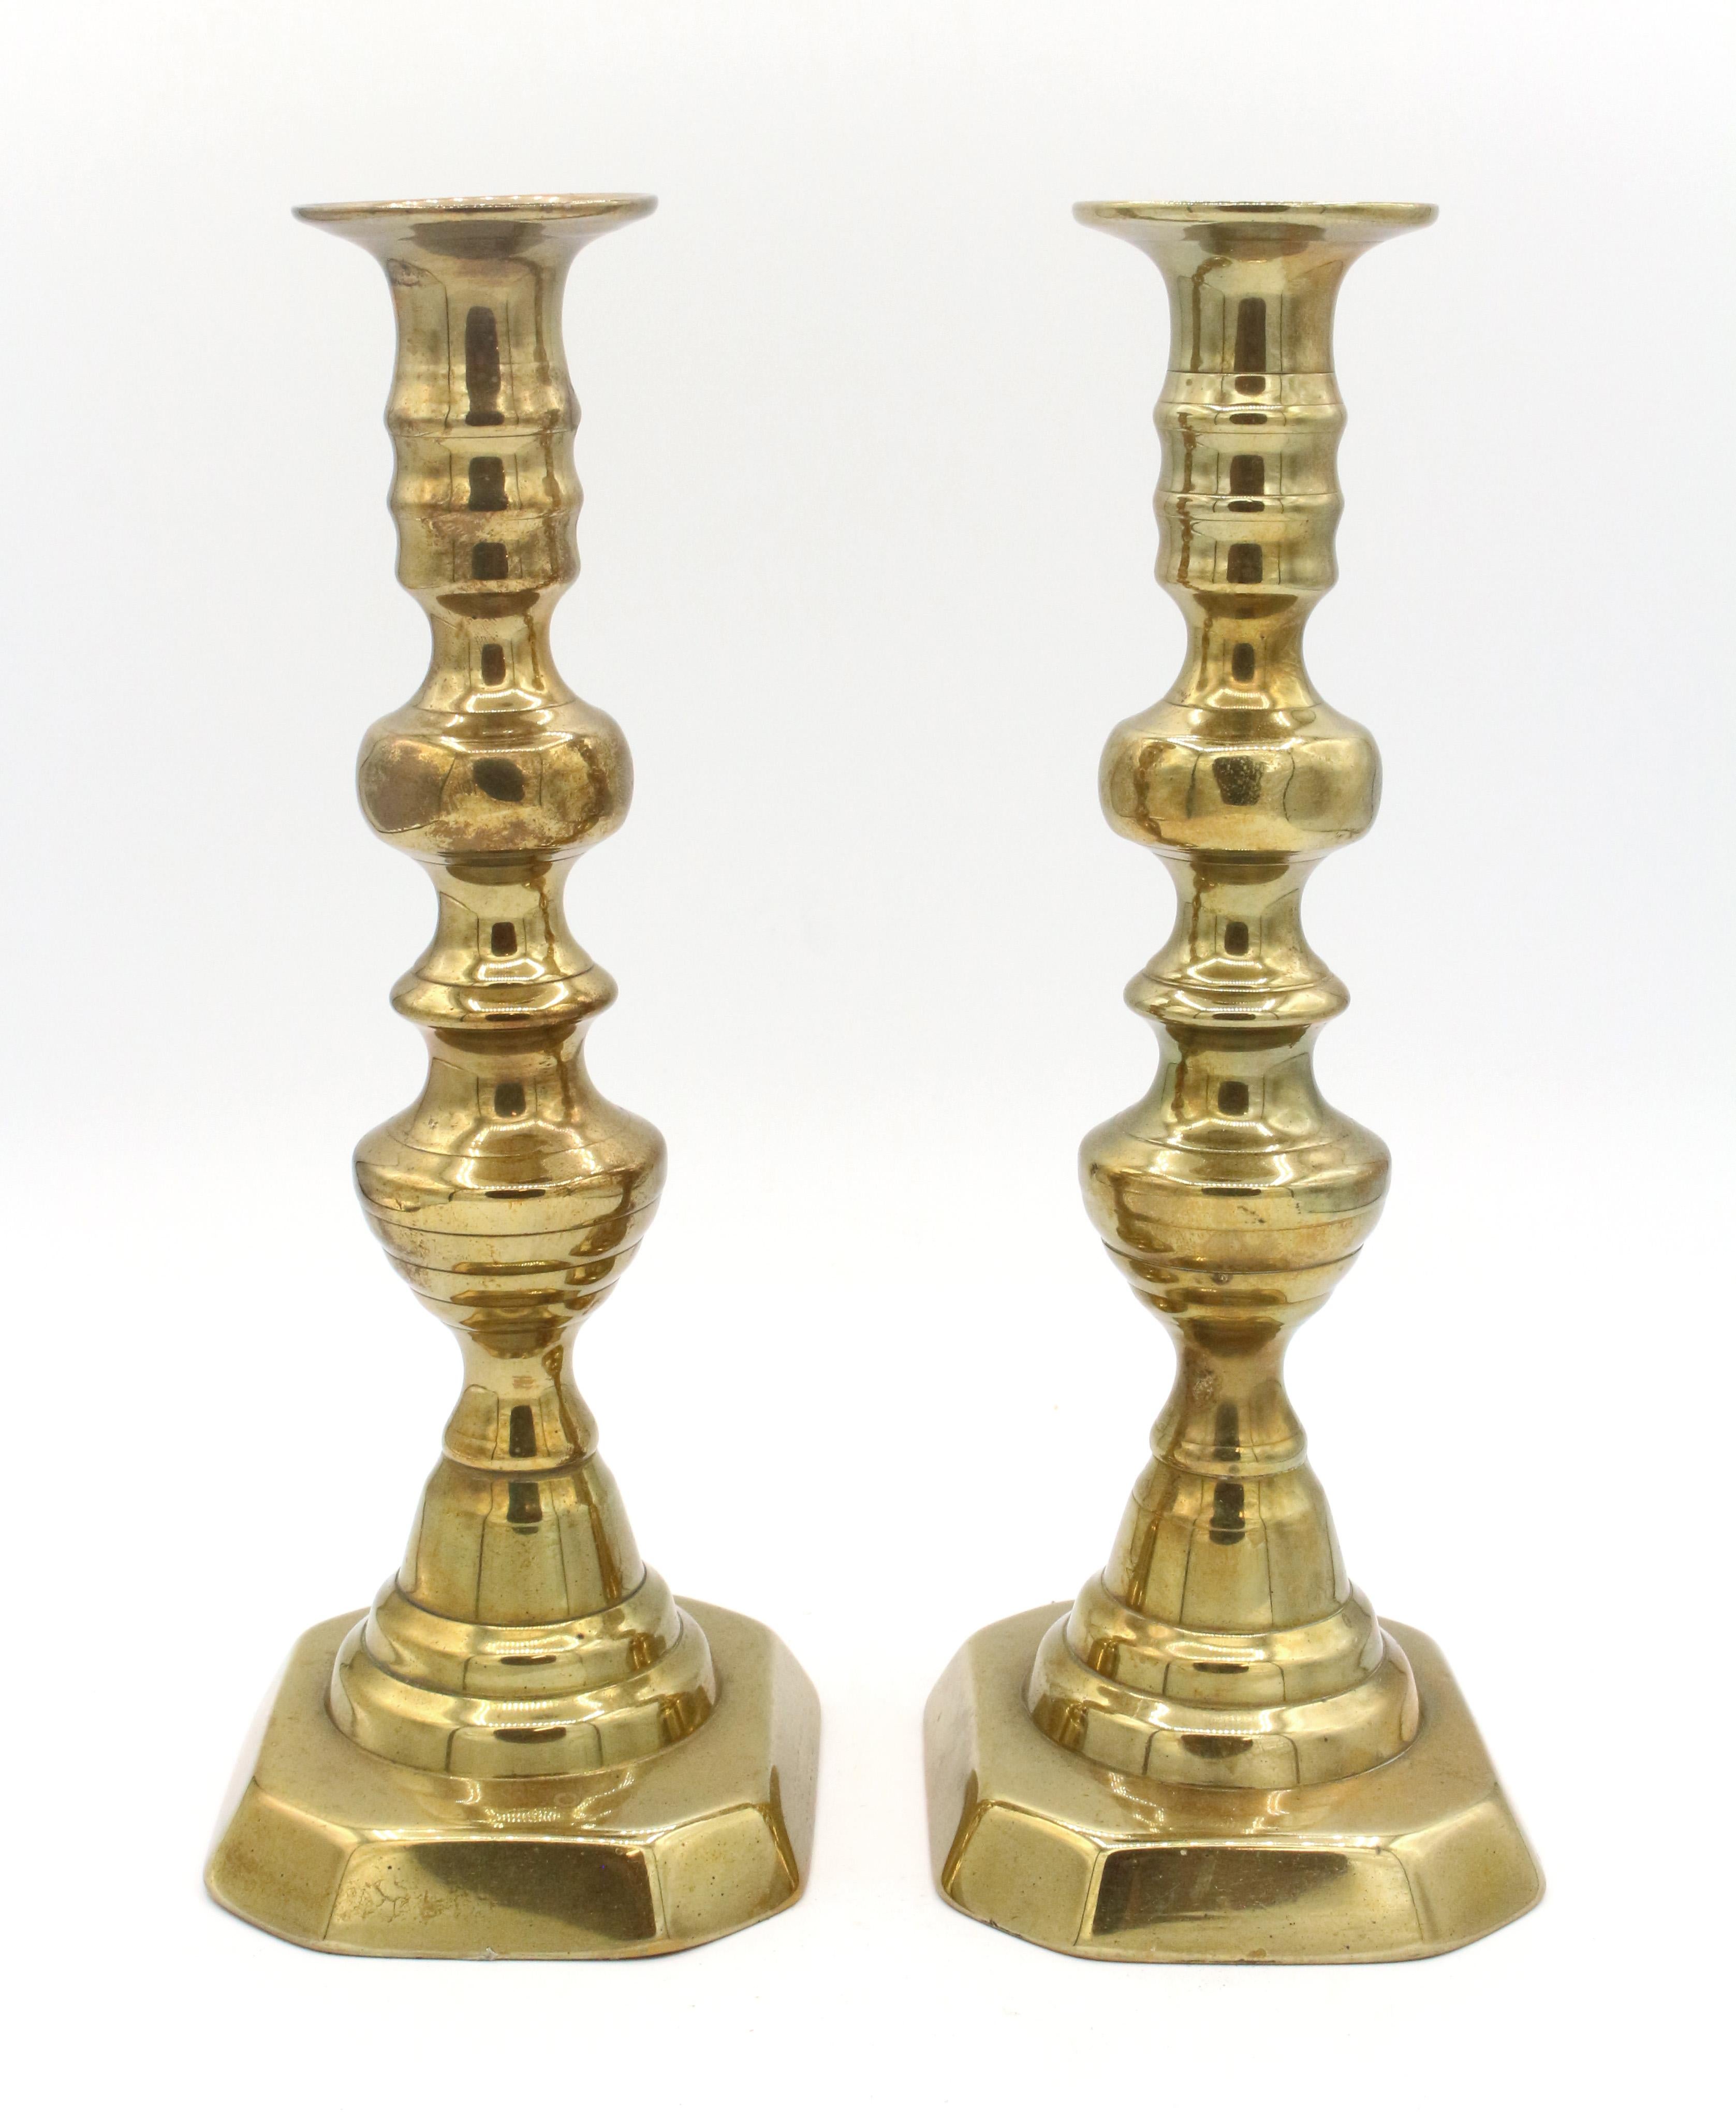 Pair of brass candlesticks, English, beehive design with push-rods (one lacks button), circa 1860s. Measures: 9 1/2